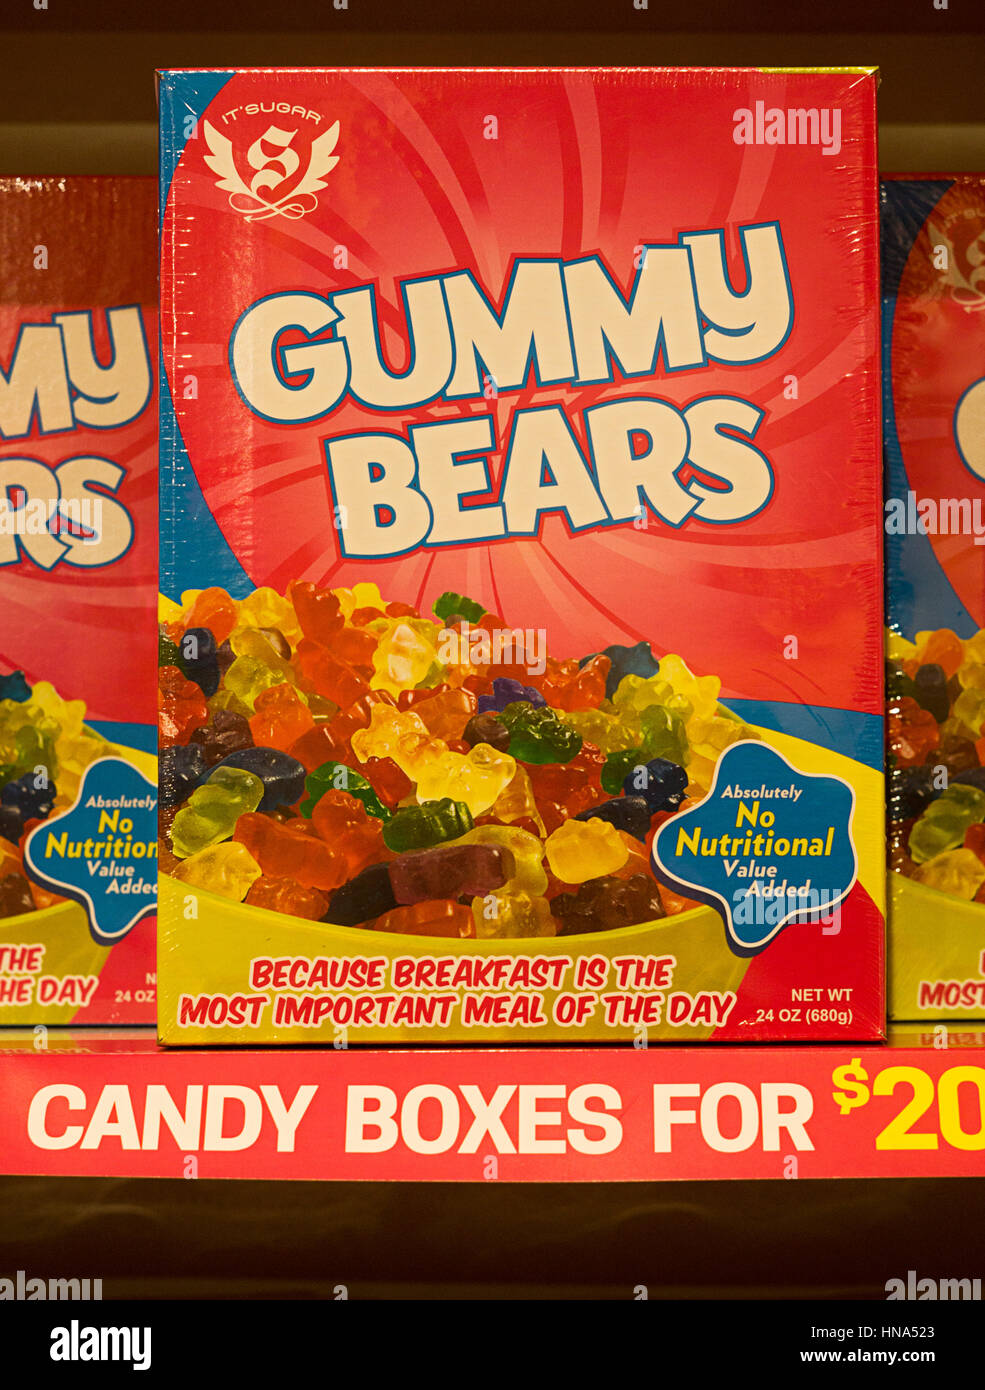 A cereal sized box of Gummy Bears for sale for $20 at It'sugar on Broadway in Greenwich Village, Manhattan, New York City. Stock Photo